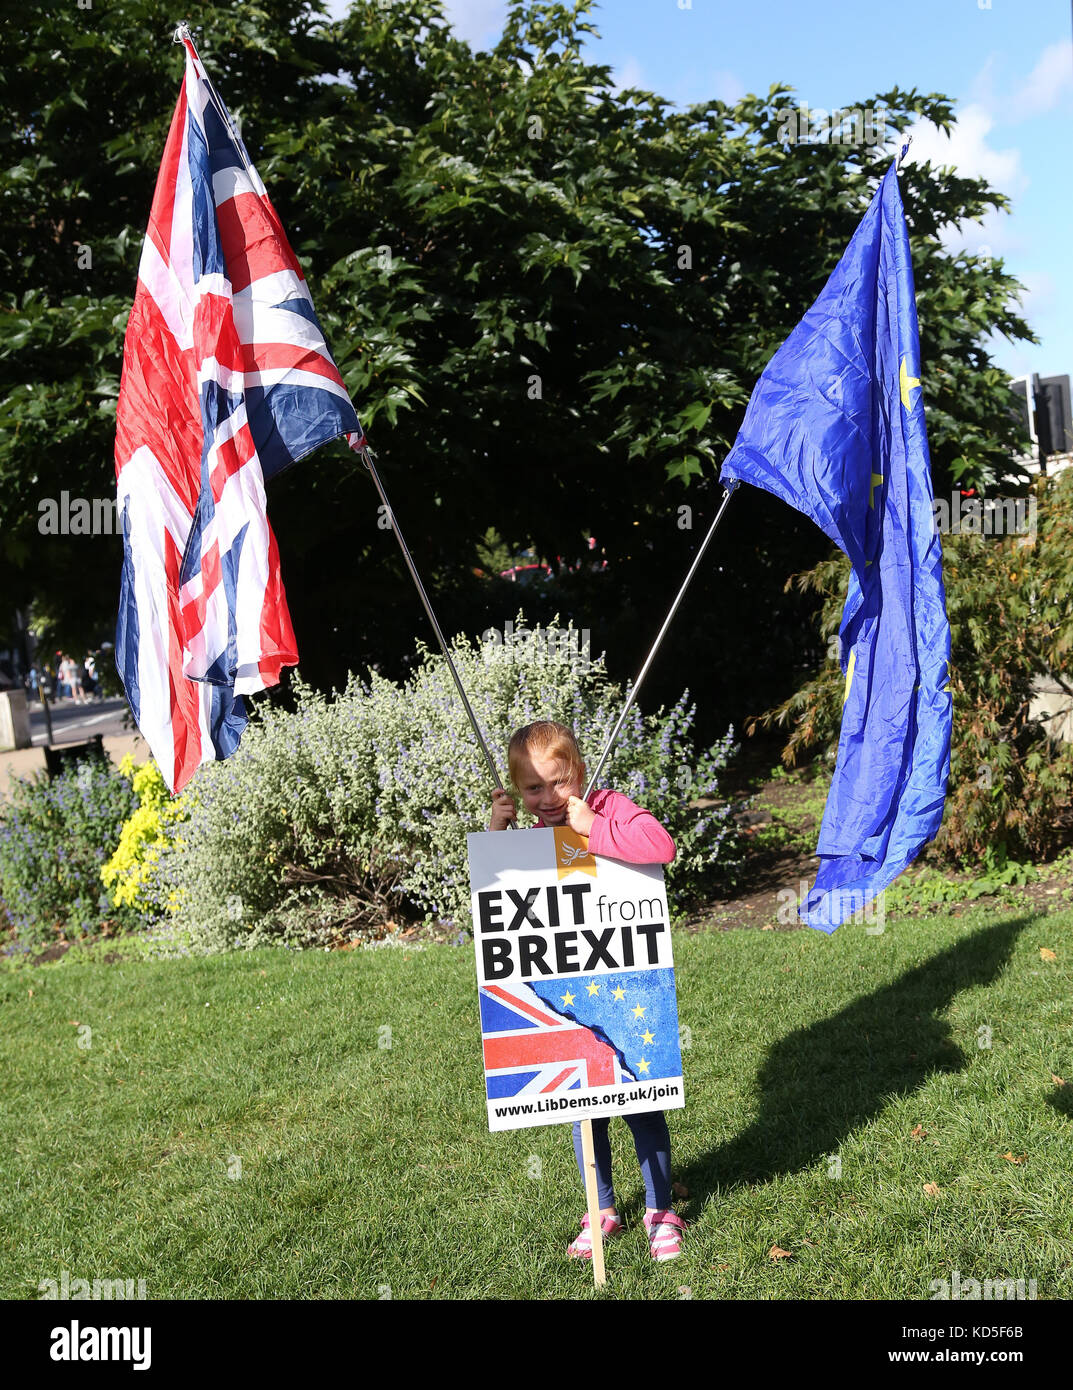 Thousands of anti-Brexit campaigners take part in the People’s March for Europe pro-EU rally in central London. The march and rally is being held against the 2016 Brexit decision – a democratic vote by the people of Britain.  Featuring: Atmosphere Where: London, United Kingdom When: 09 Sep 2017 Credit: Dinendra Haria/WENN.com Stock Photo